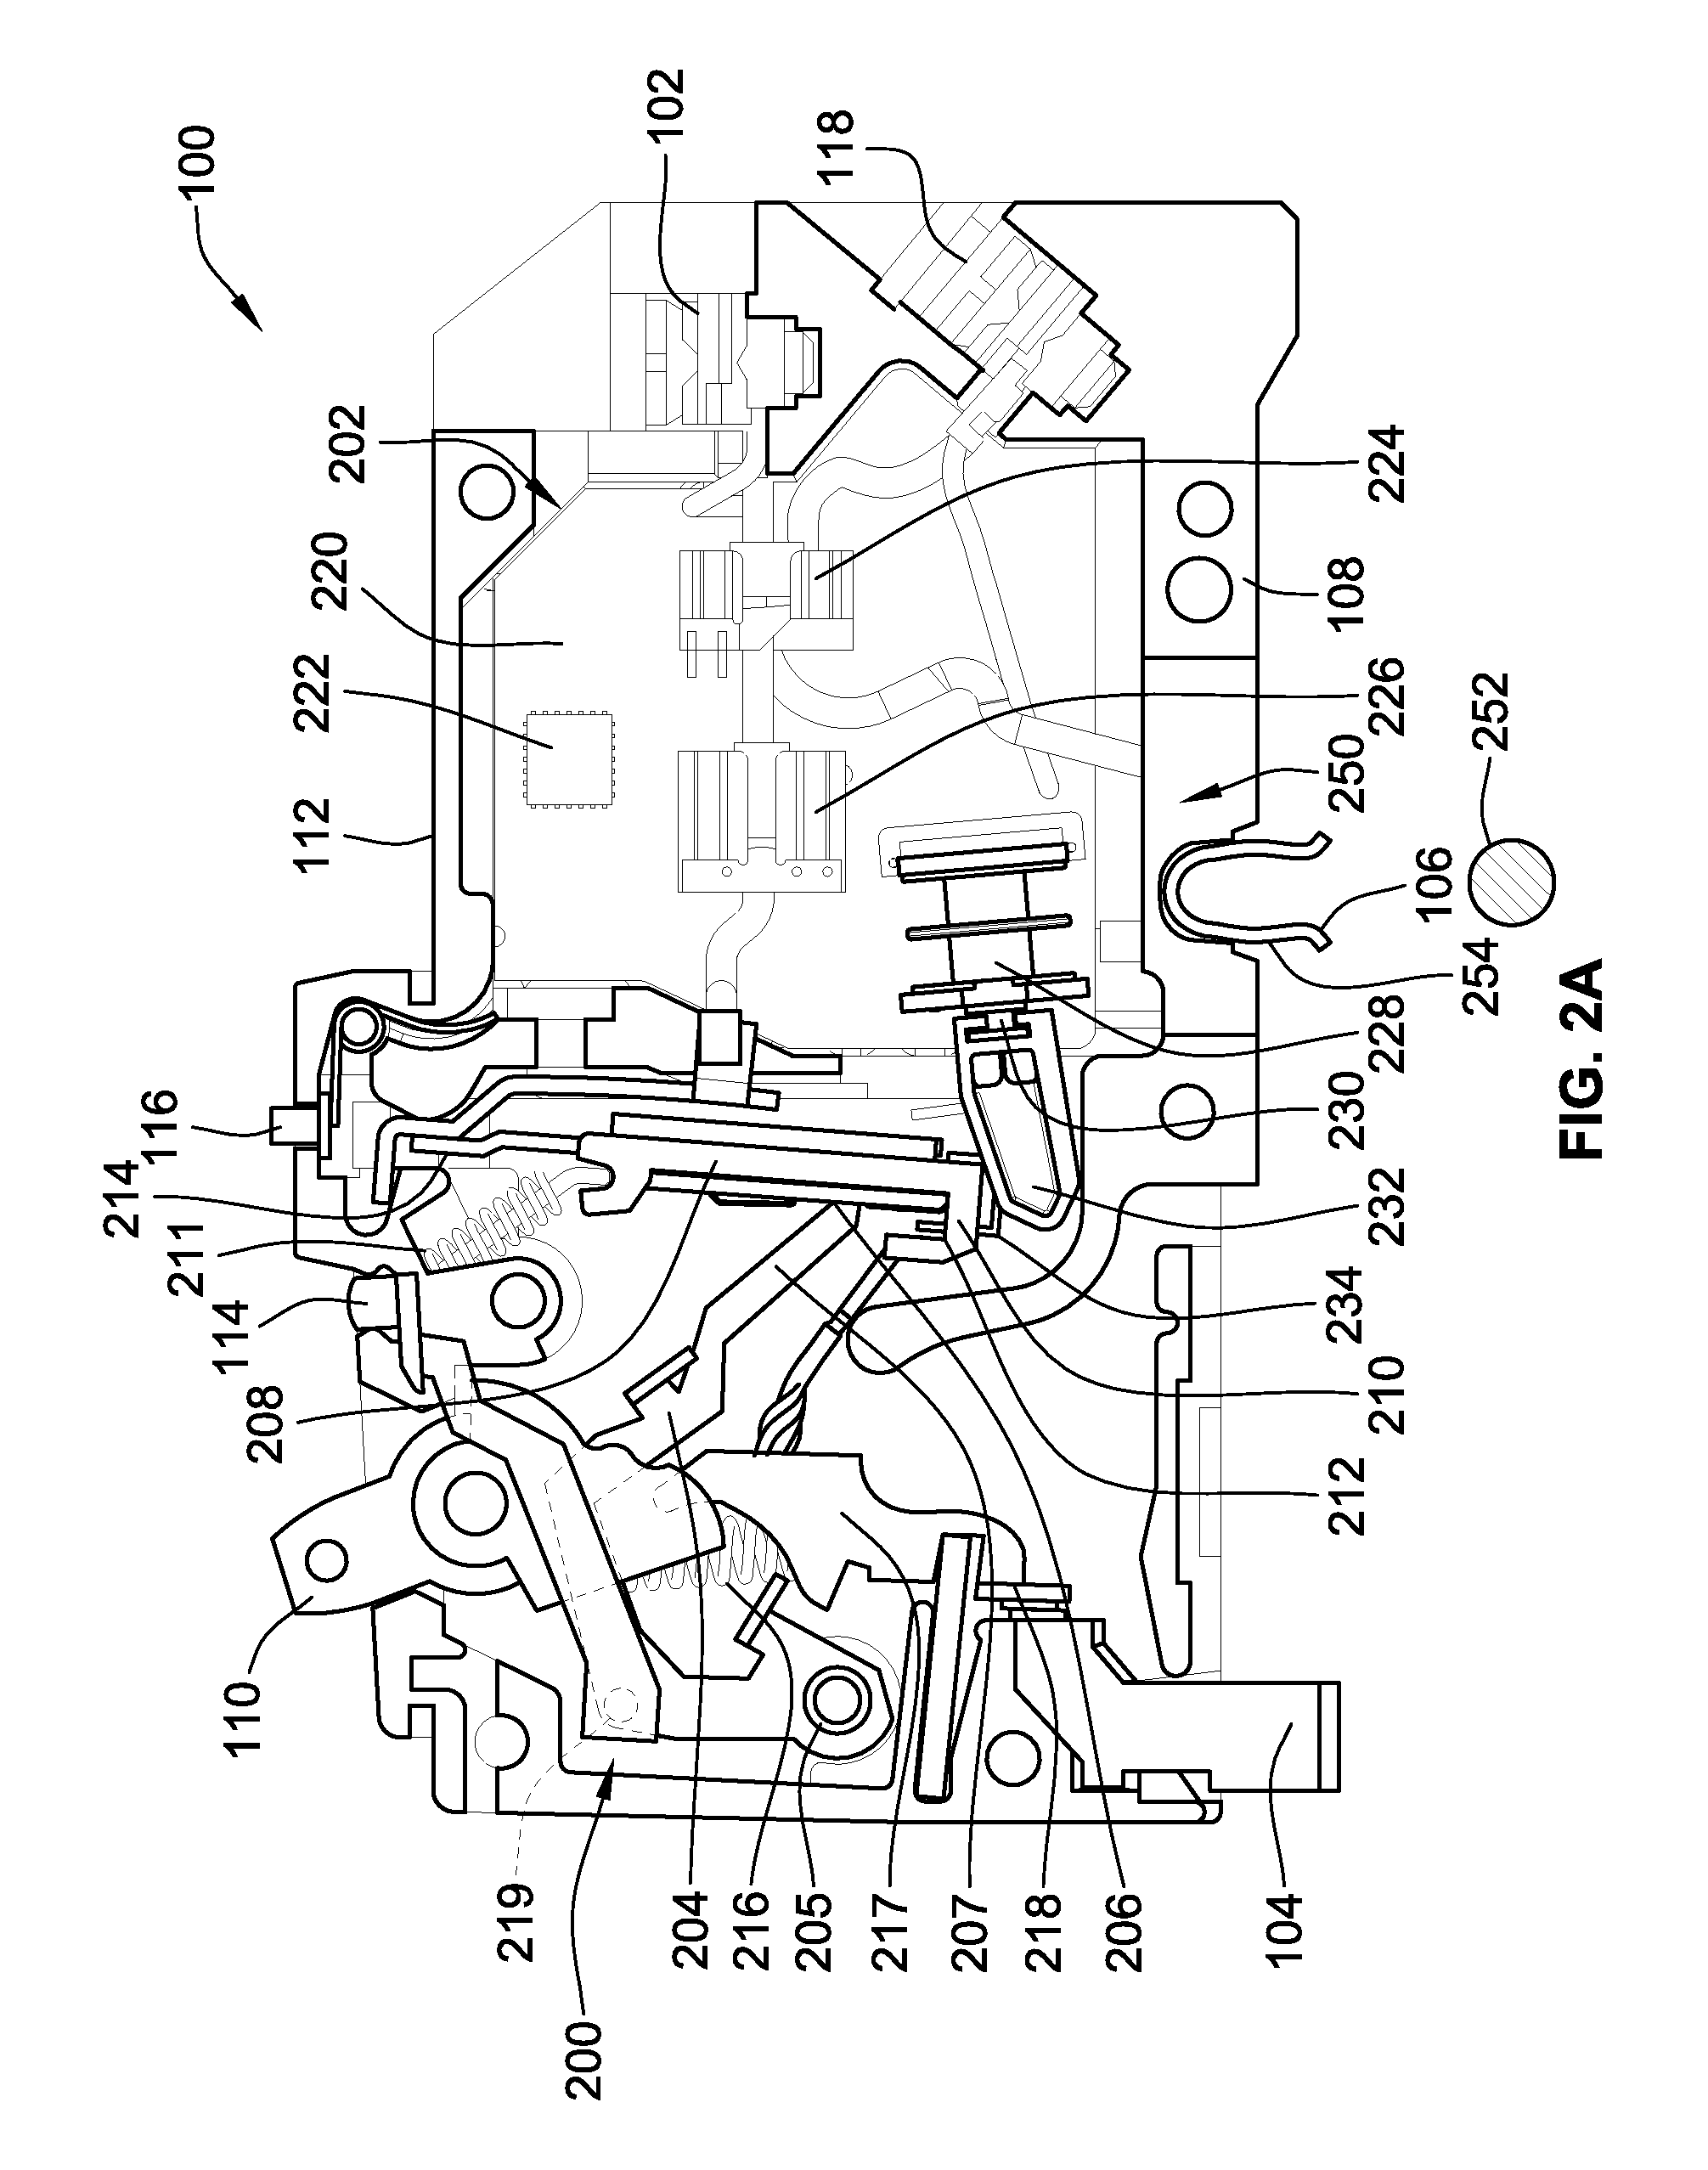 Circuit breaker with plug on neutral connection lock-out mechanism